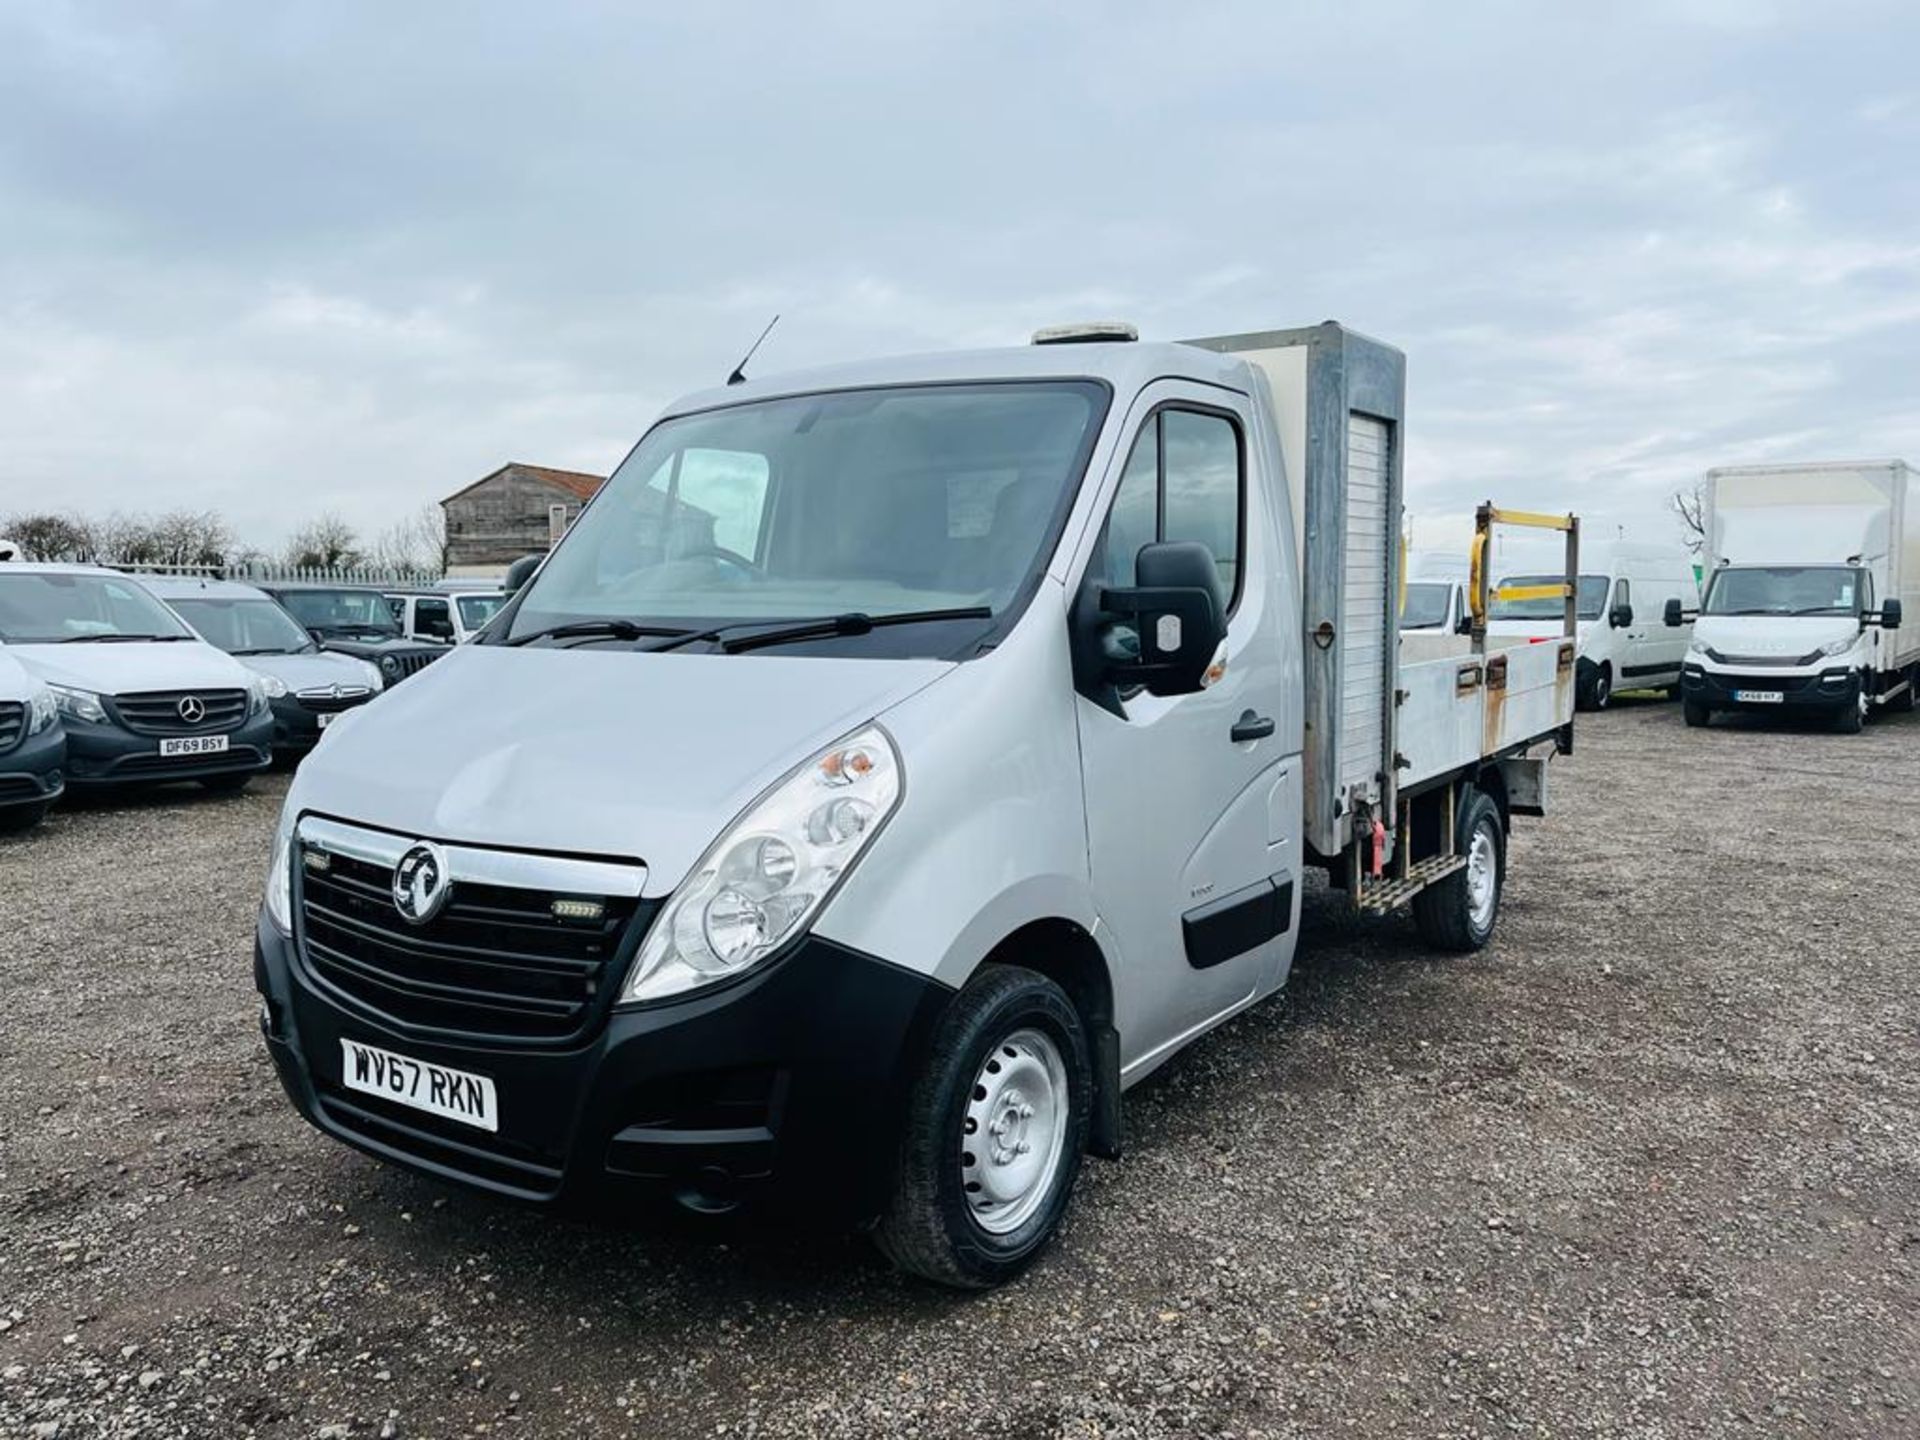 **ON SALE** Vauxhall Movano 2.3 CDTI BlueInjection F3500 L2 Dropside Alloy Body 2017 '67 Reg' - Image 3 of 19